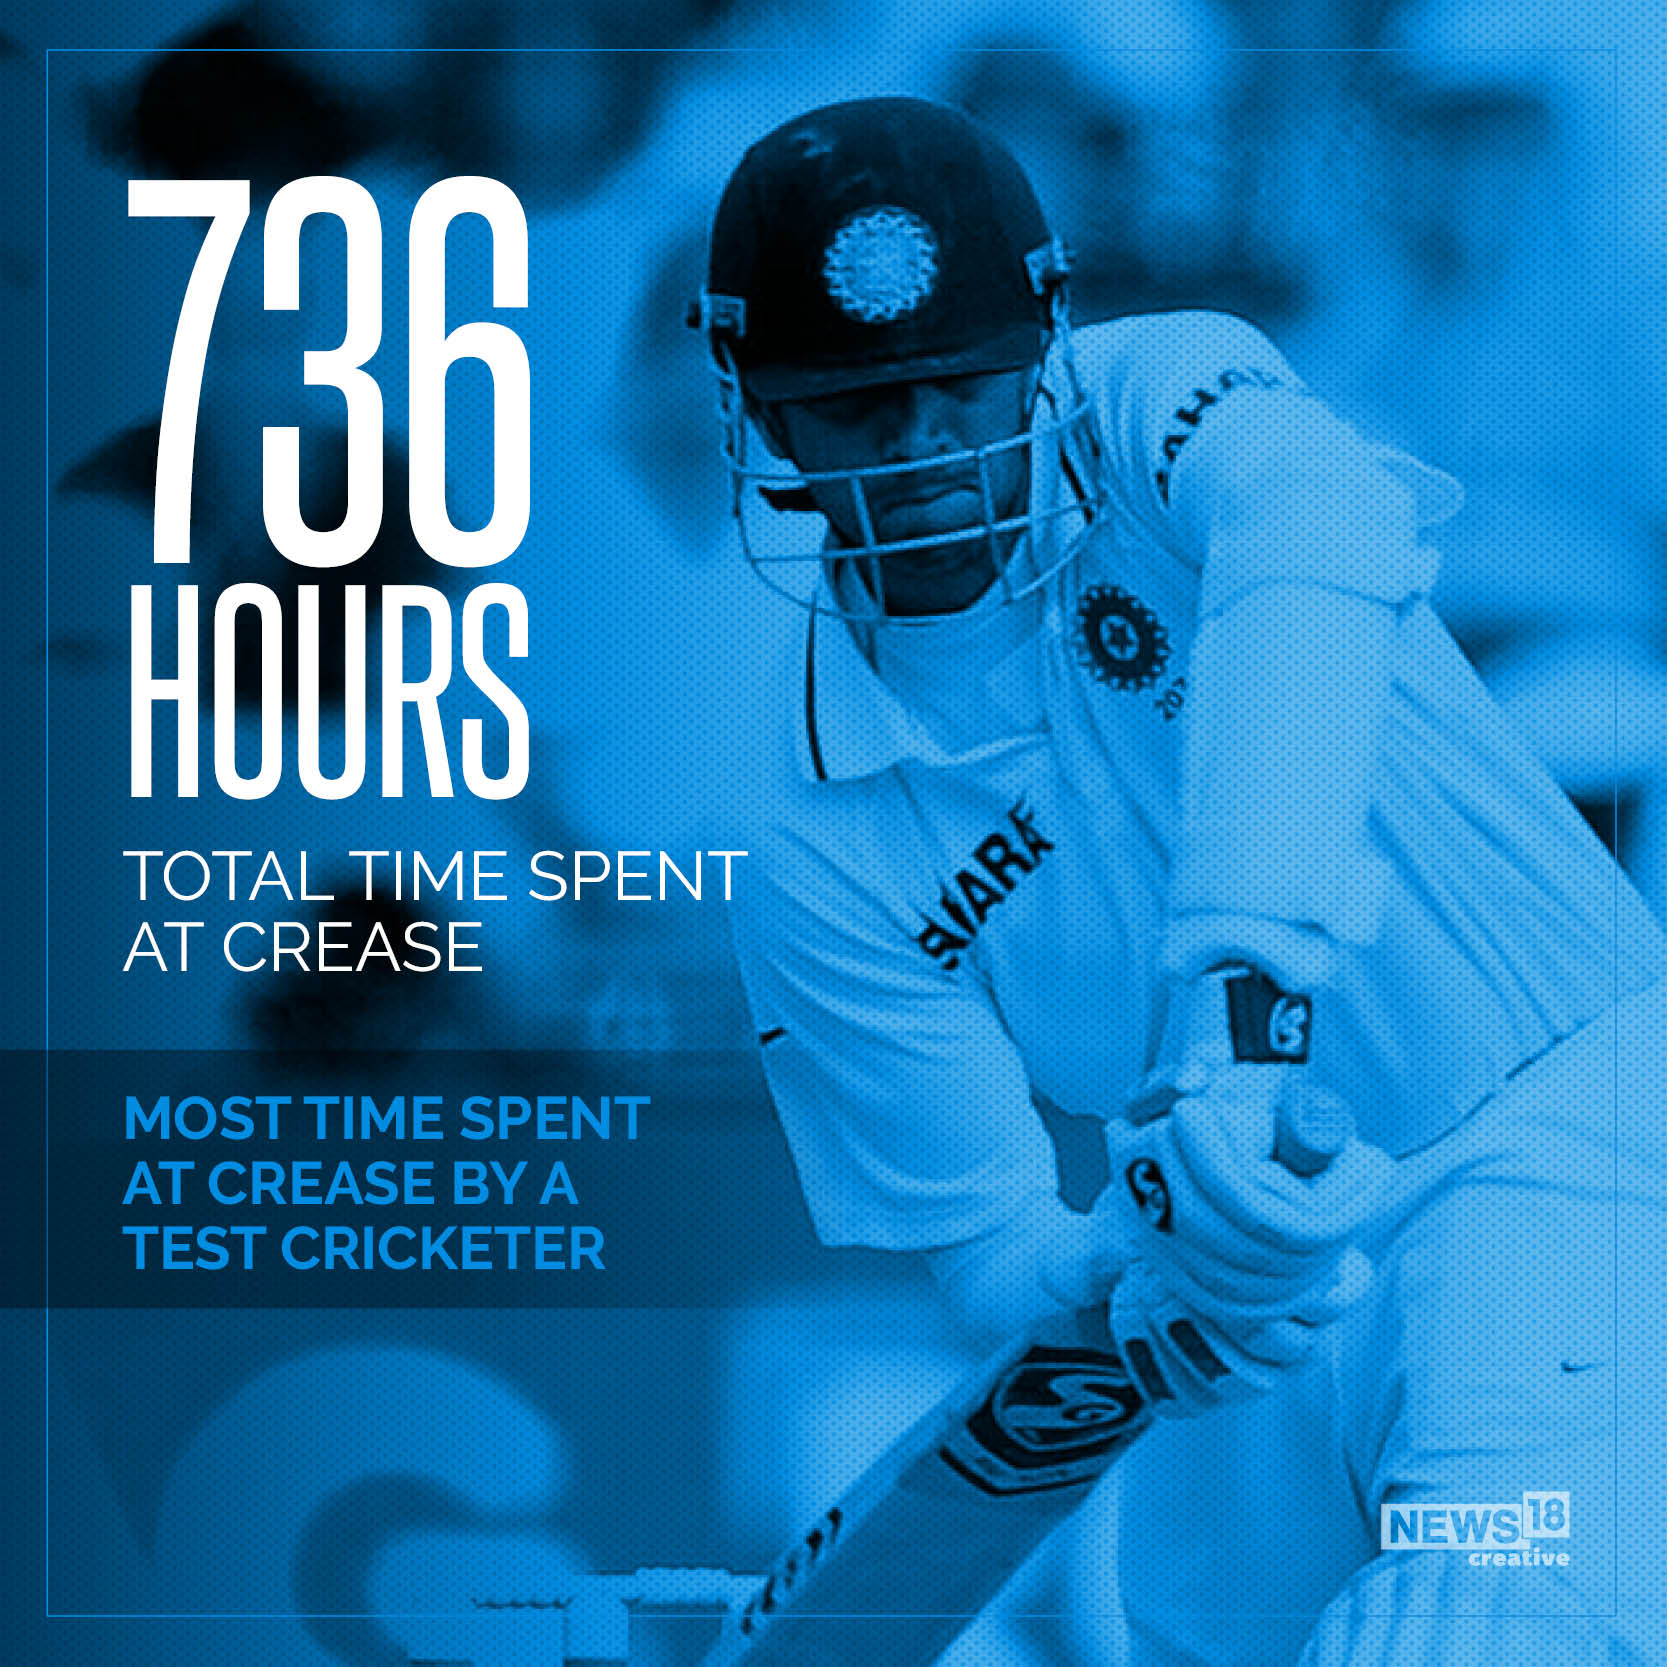 The Wall: On Rahul Dravid's birthday, his career in numbers